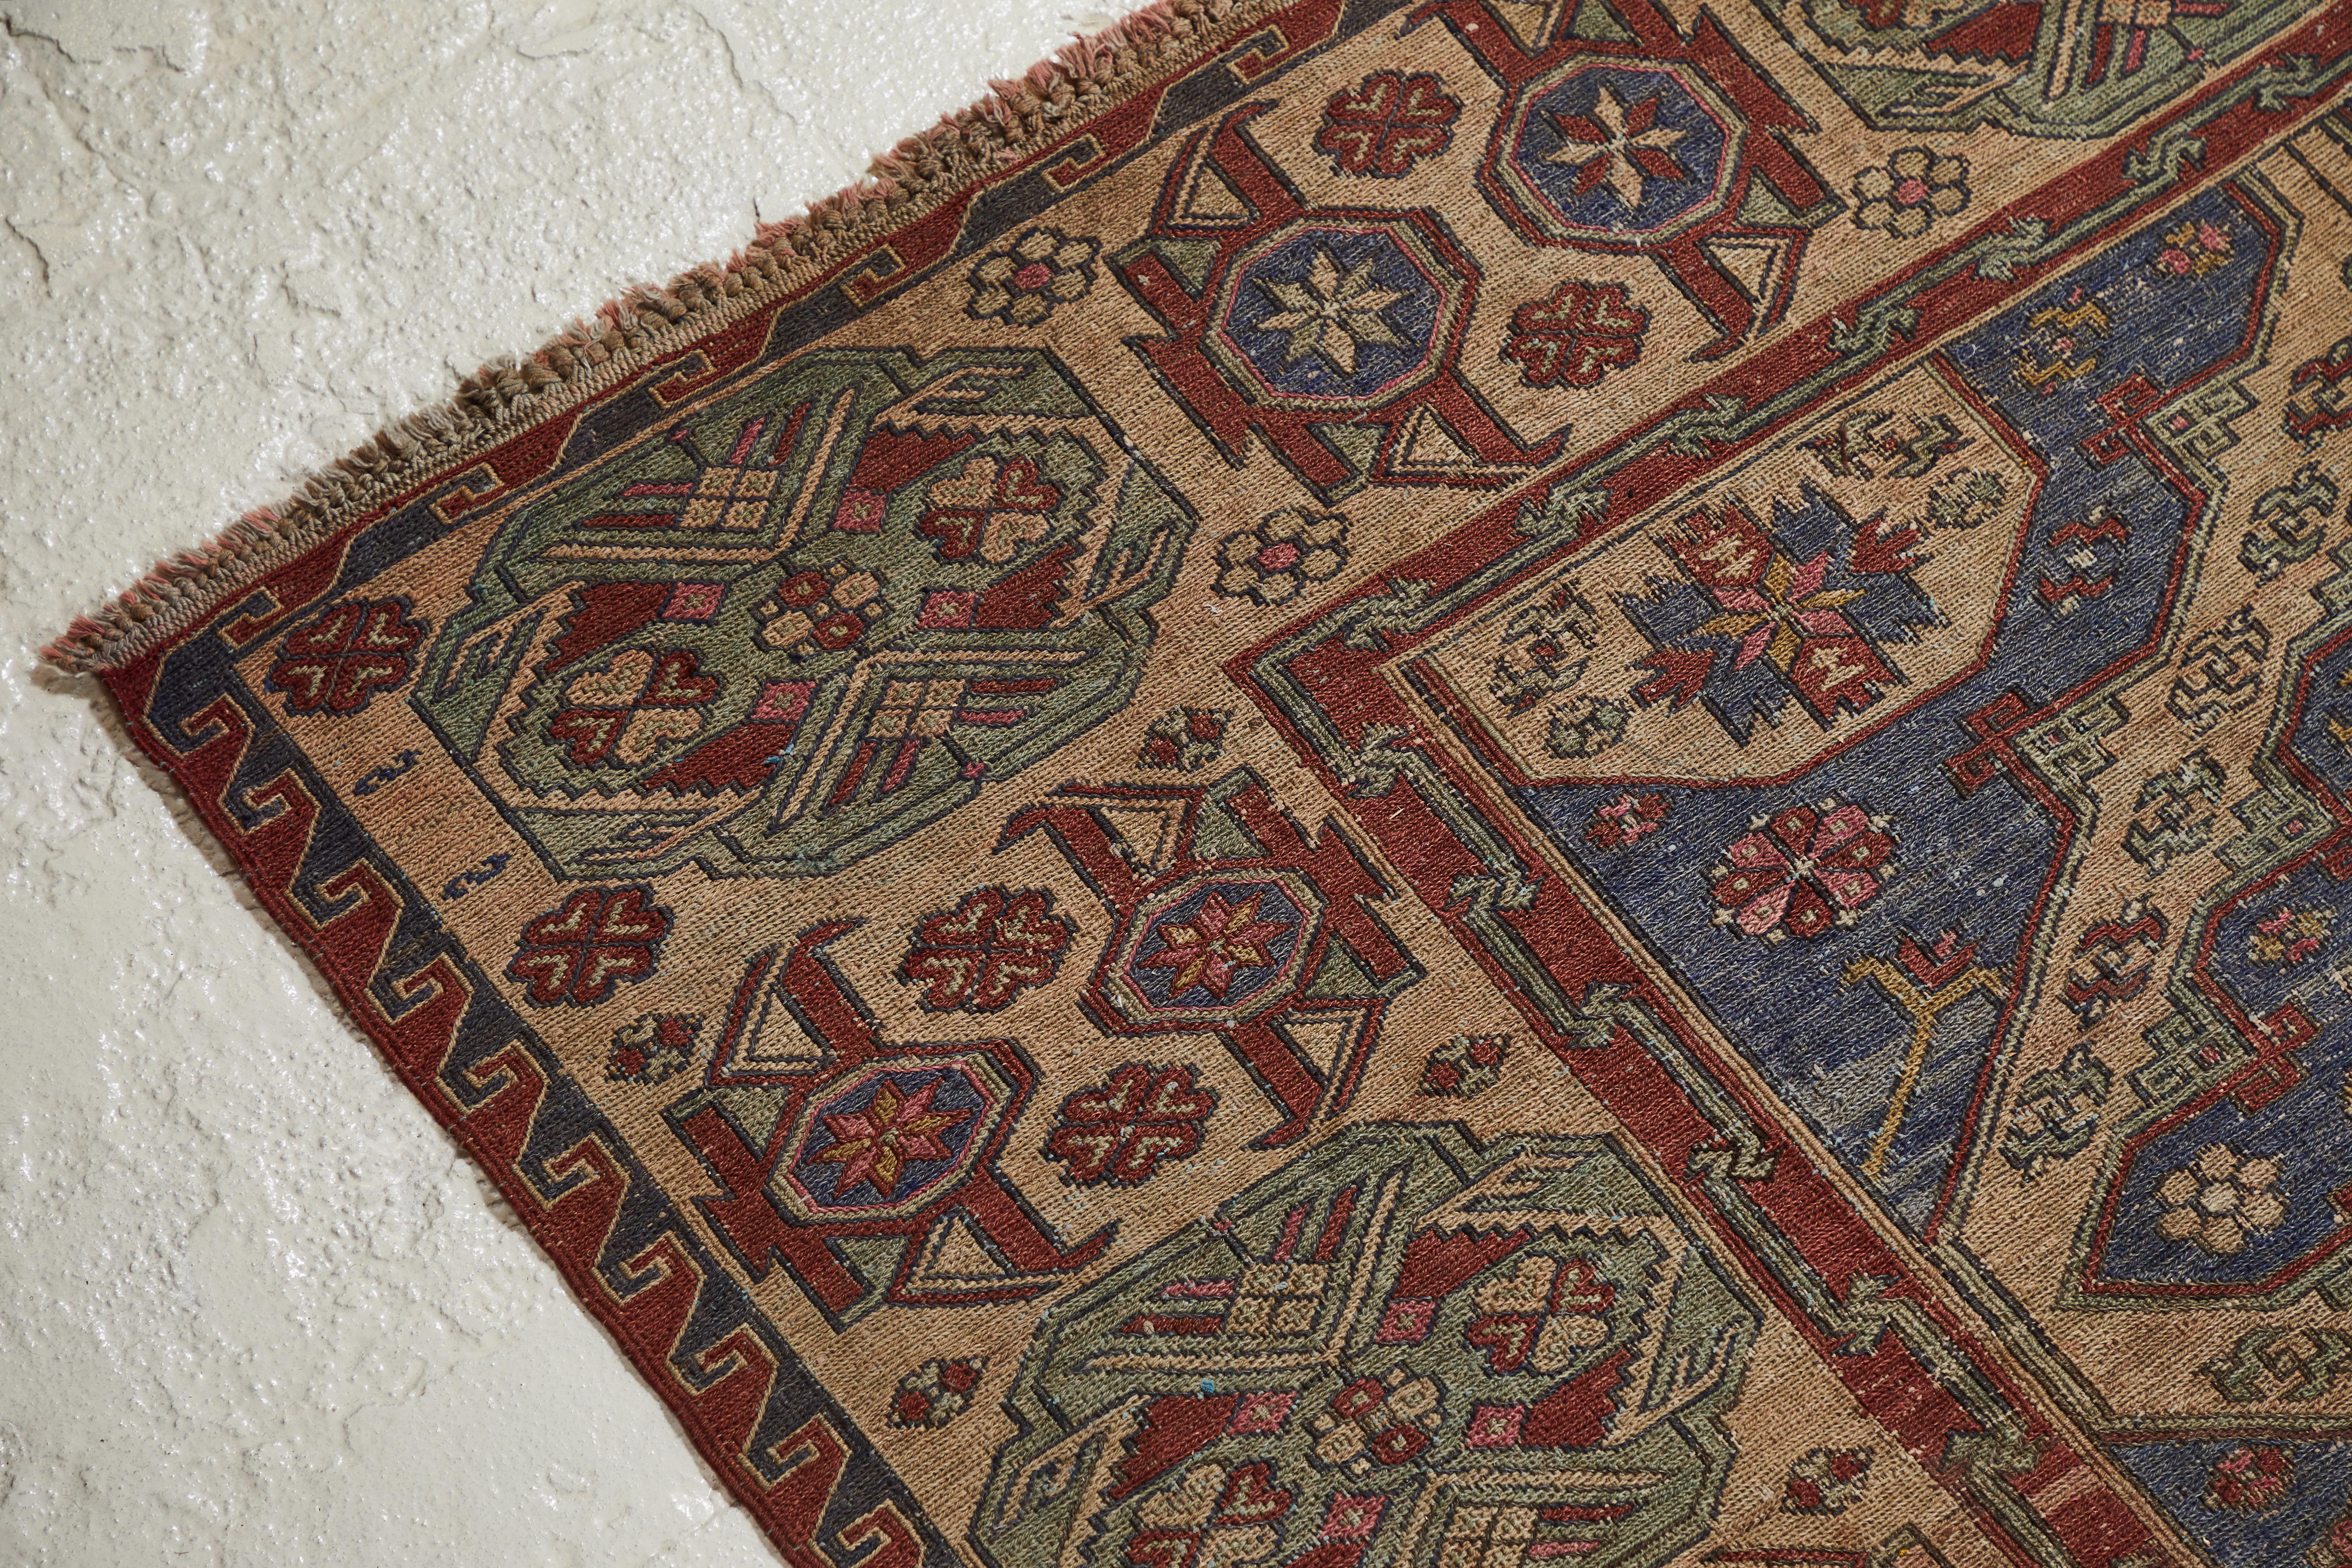 Beautiful large Caucasian rug with a unique and intricate pattern, the rug is worn and aged beautifully. The rug has shades of blue, red, natural and pink.